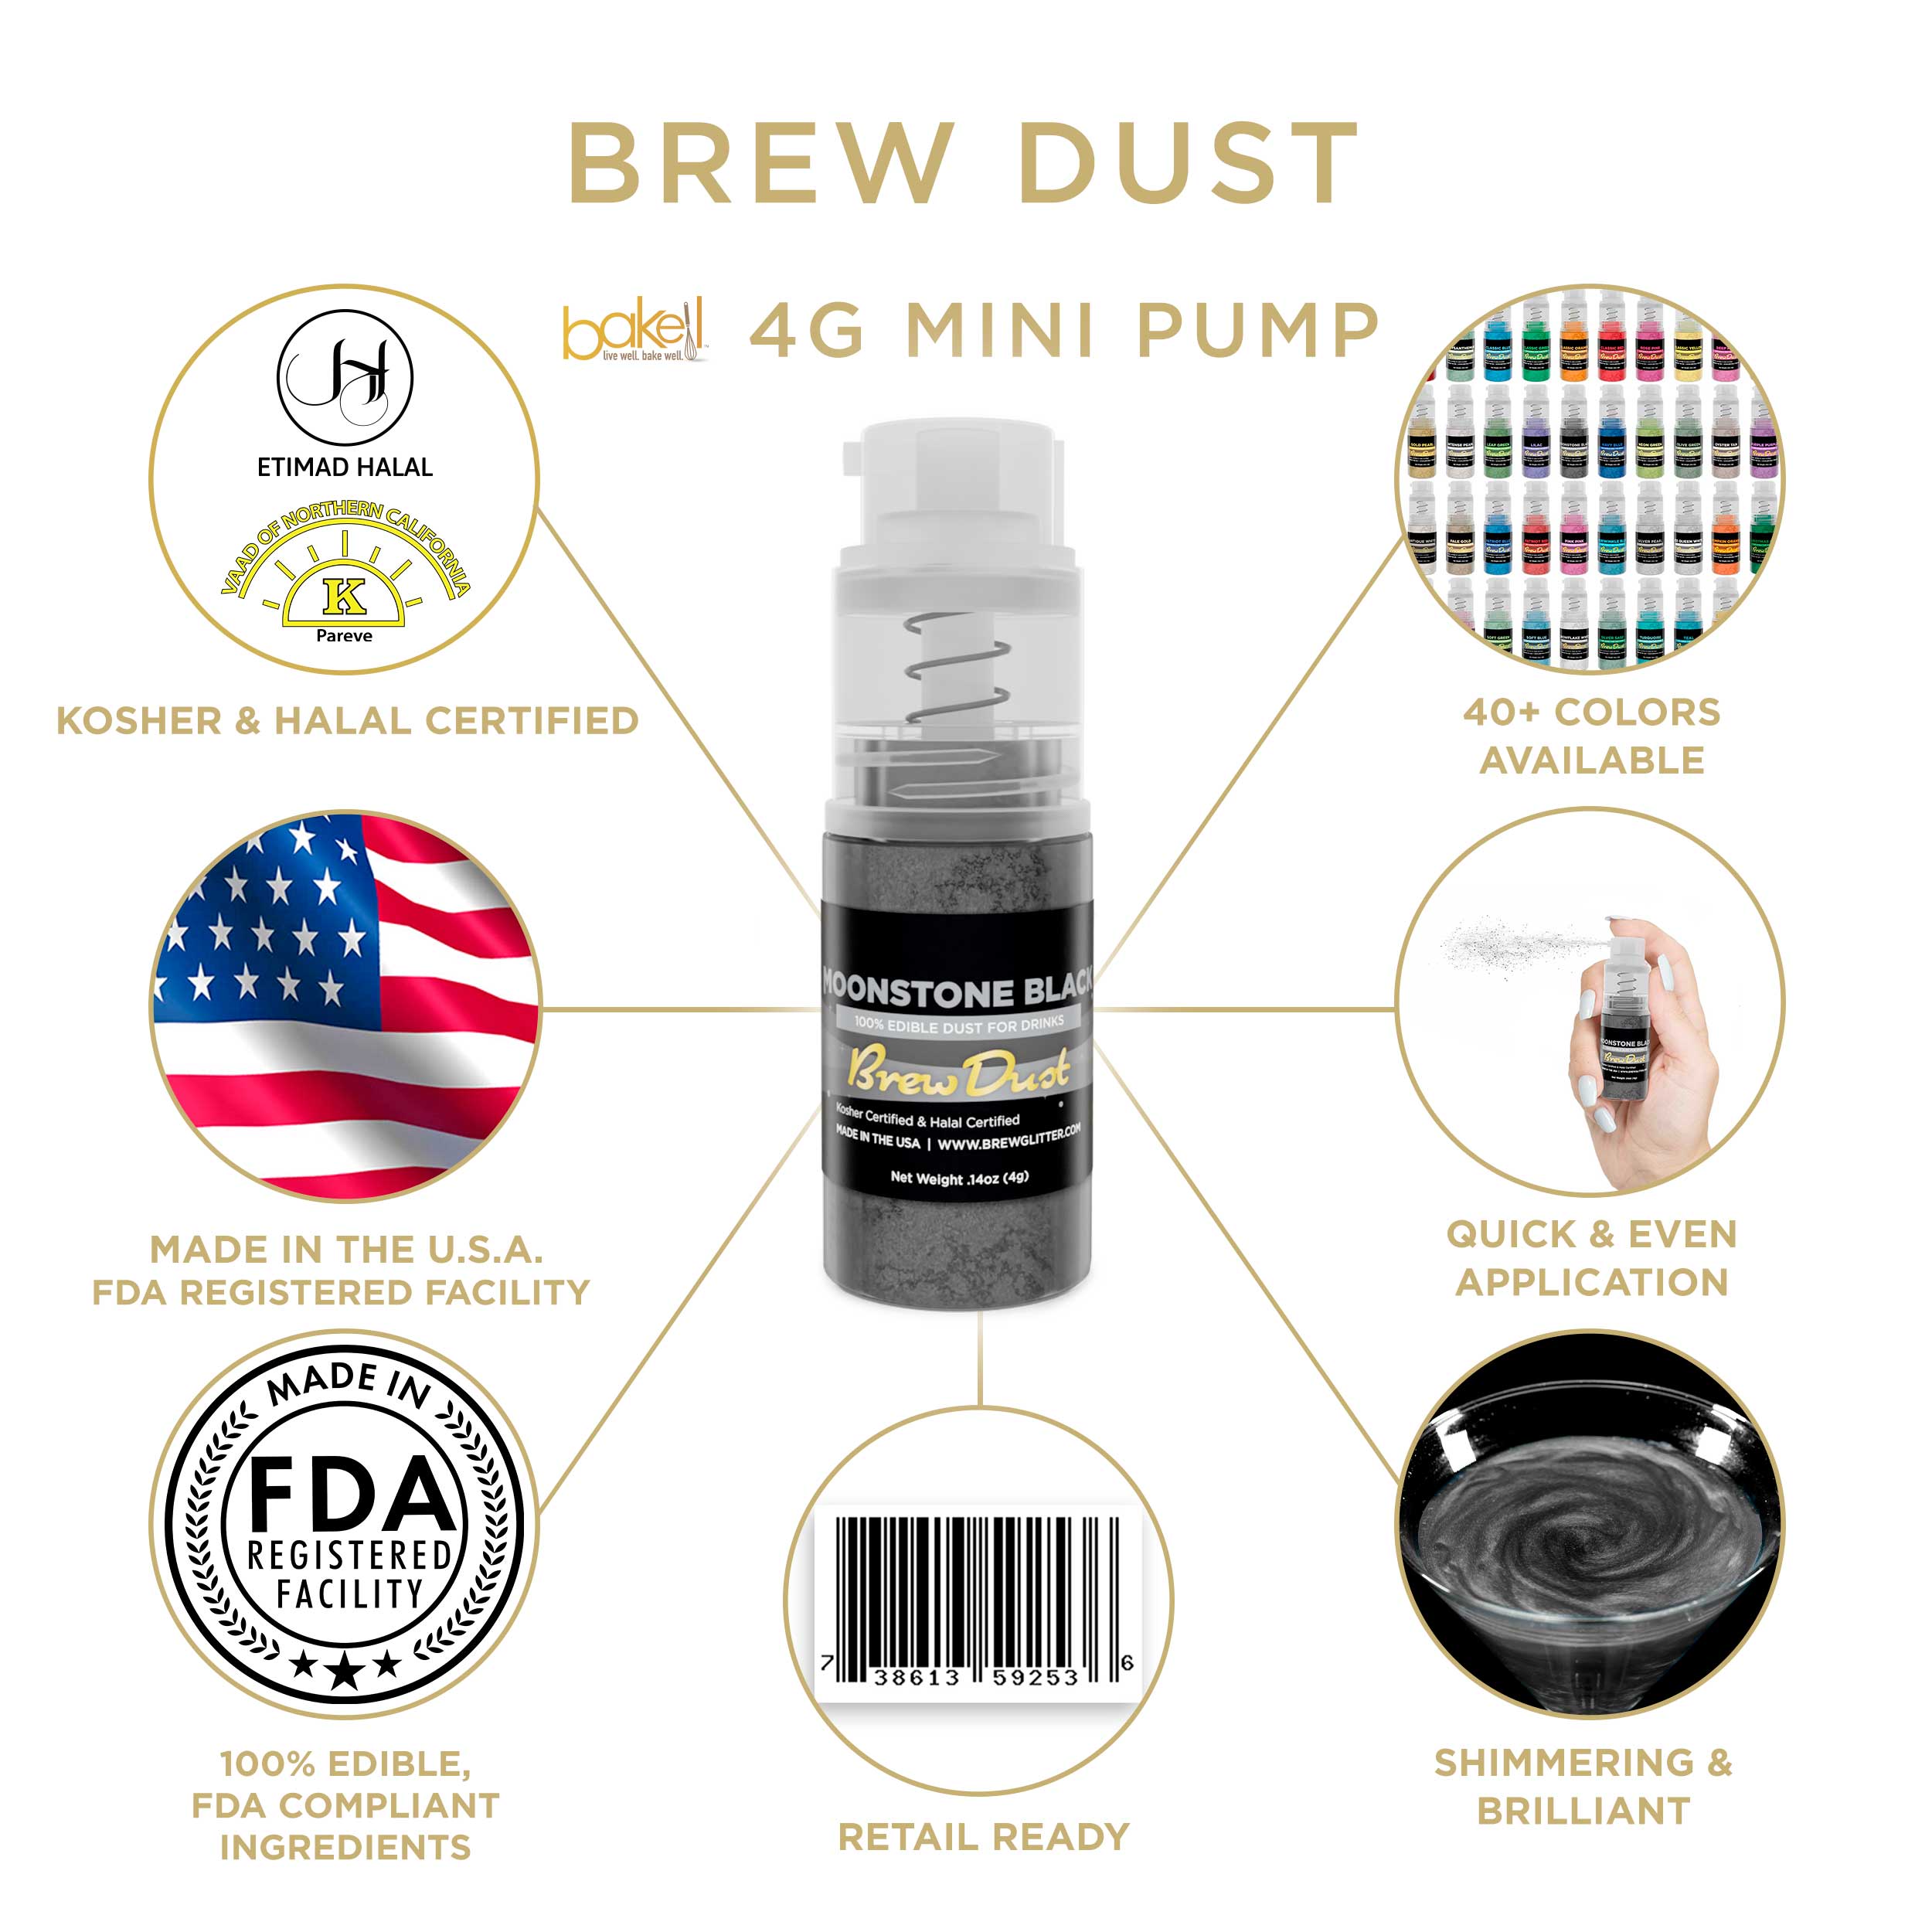 Moonstone Black Brew Dust Miniature Spray Pump | Infographic and Information